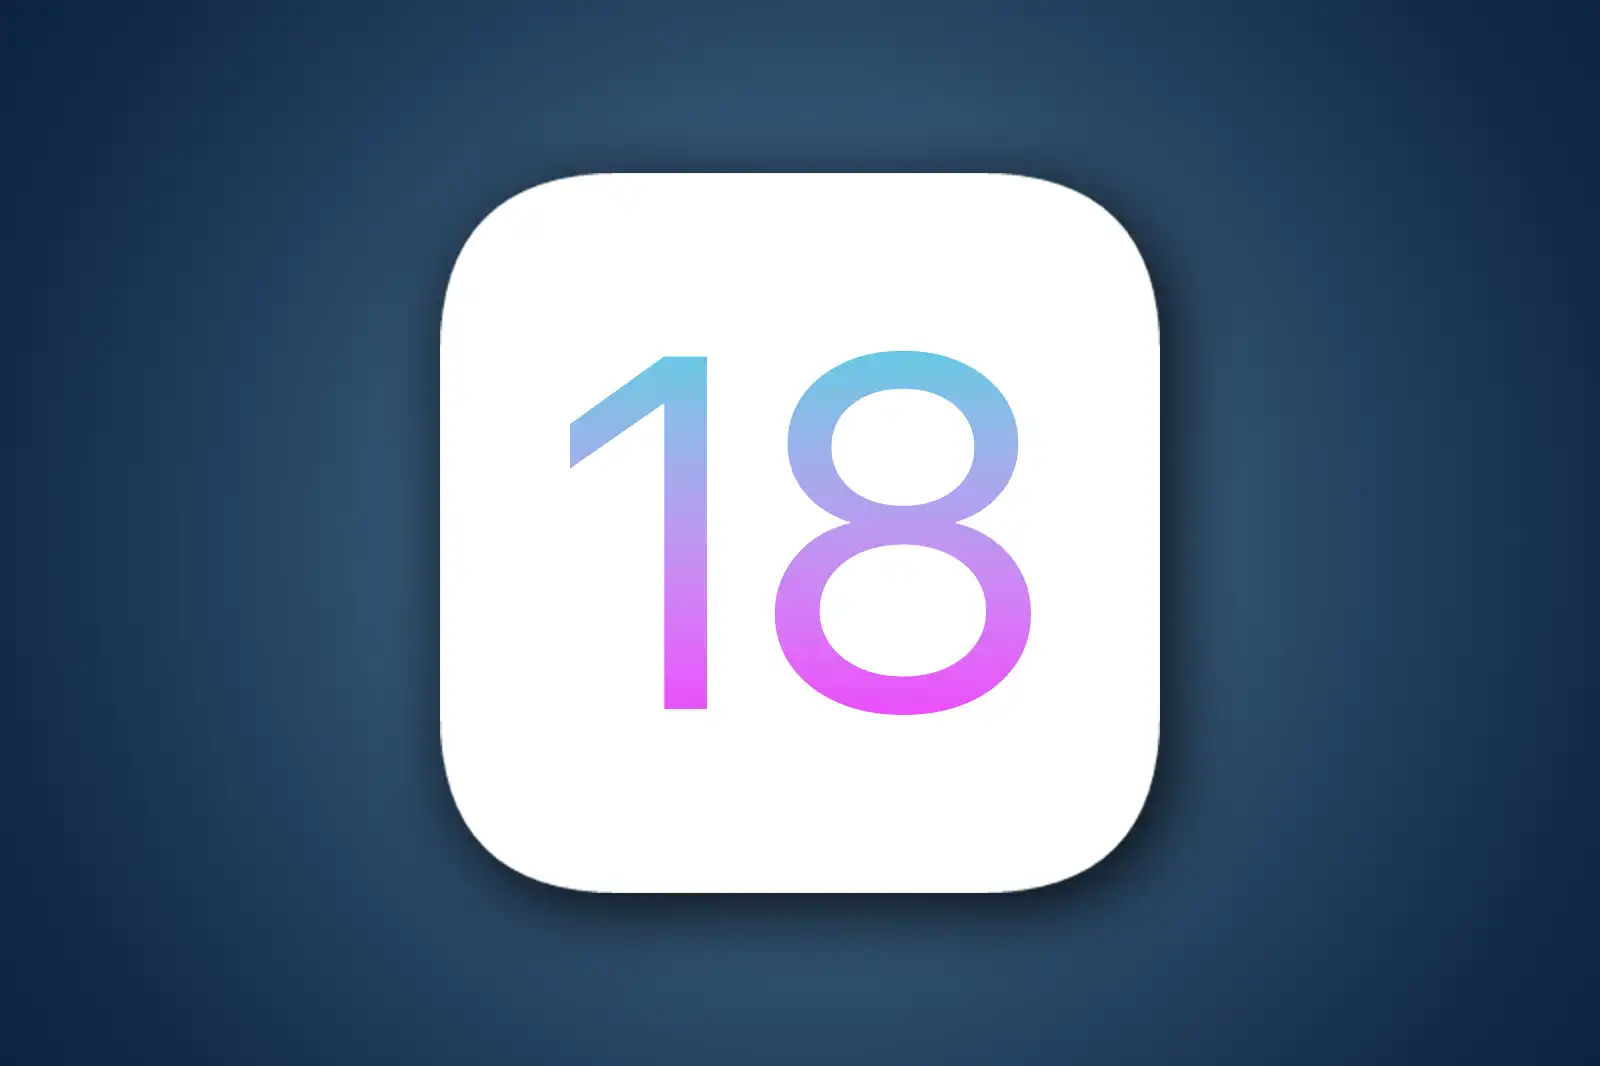 Big changes coming with iOS 18